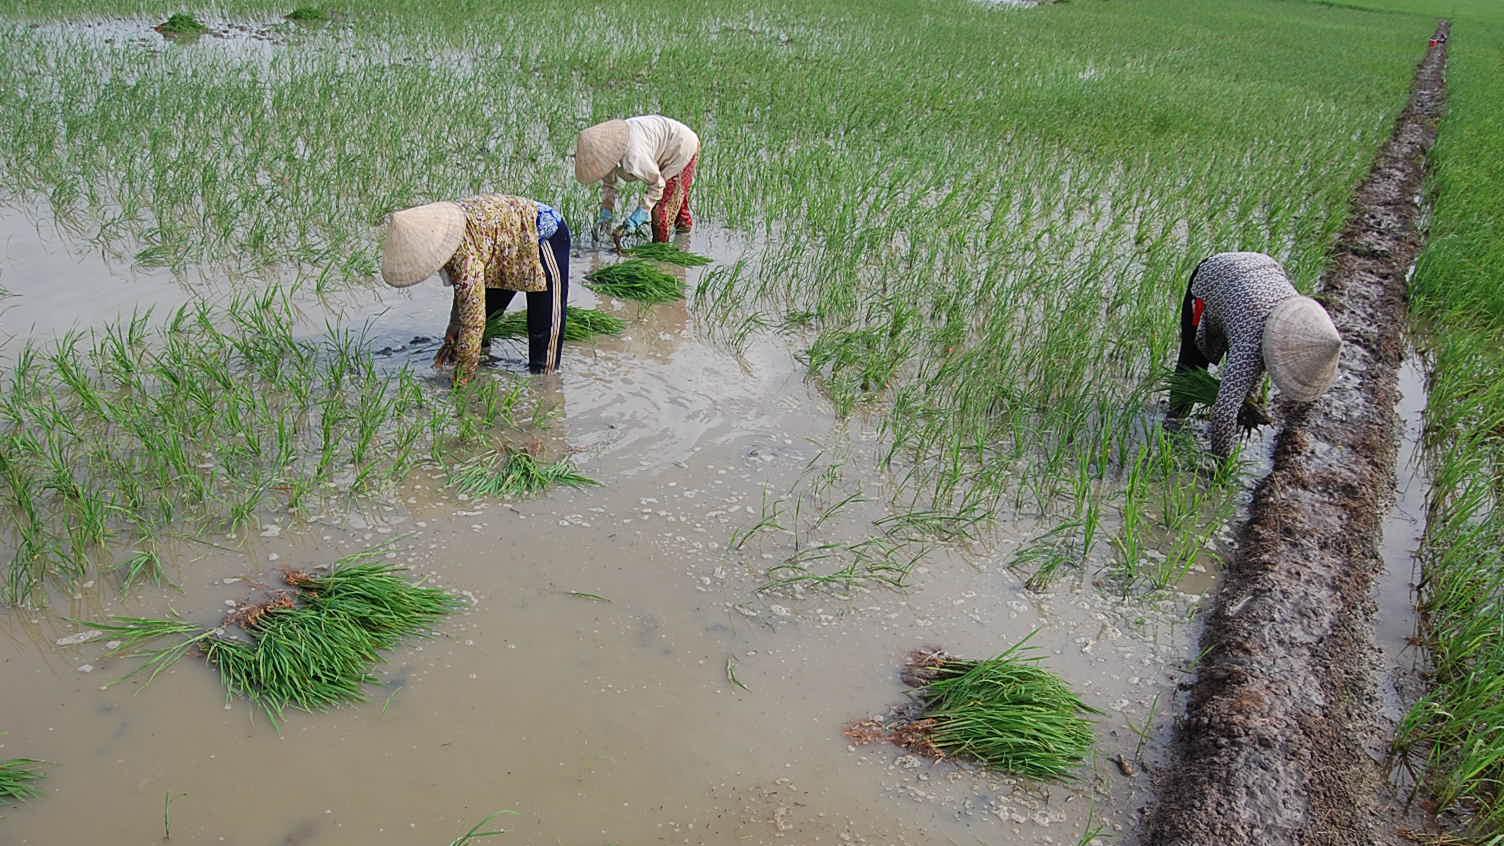 Field workers transplant rice on a farm in Soc Trang Province, Vietnam.